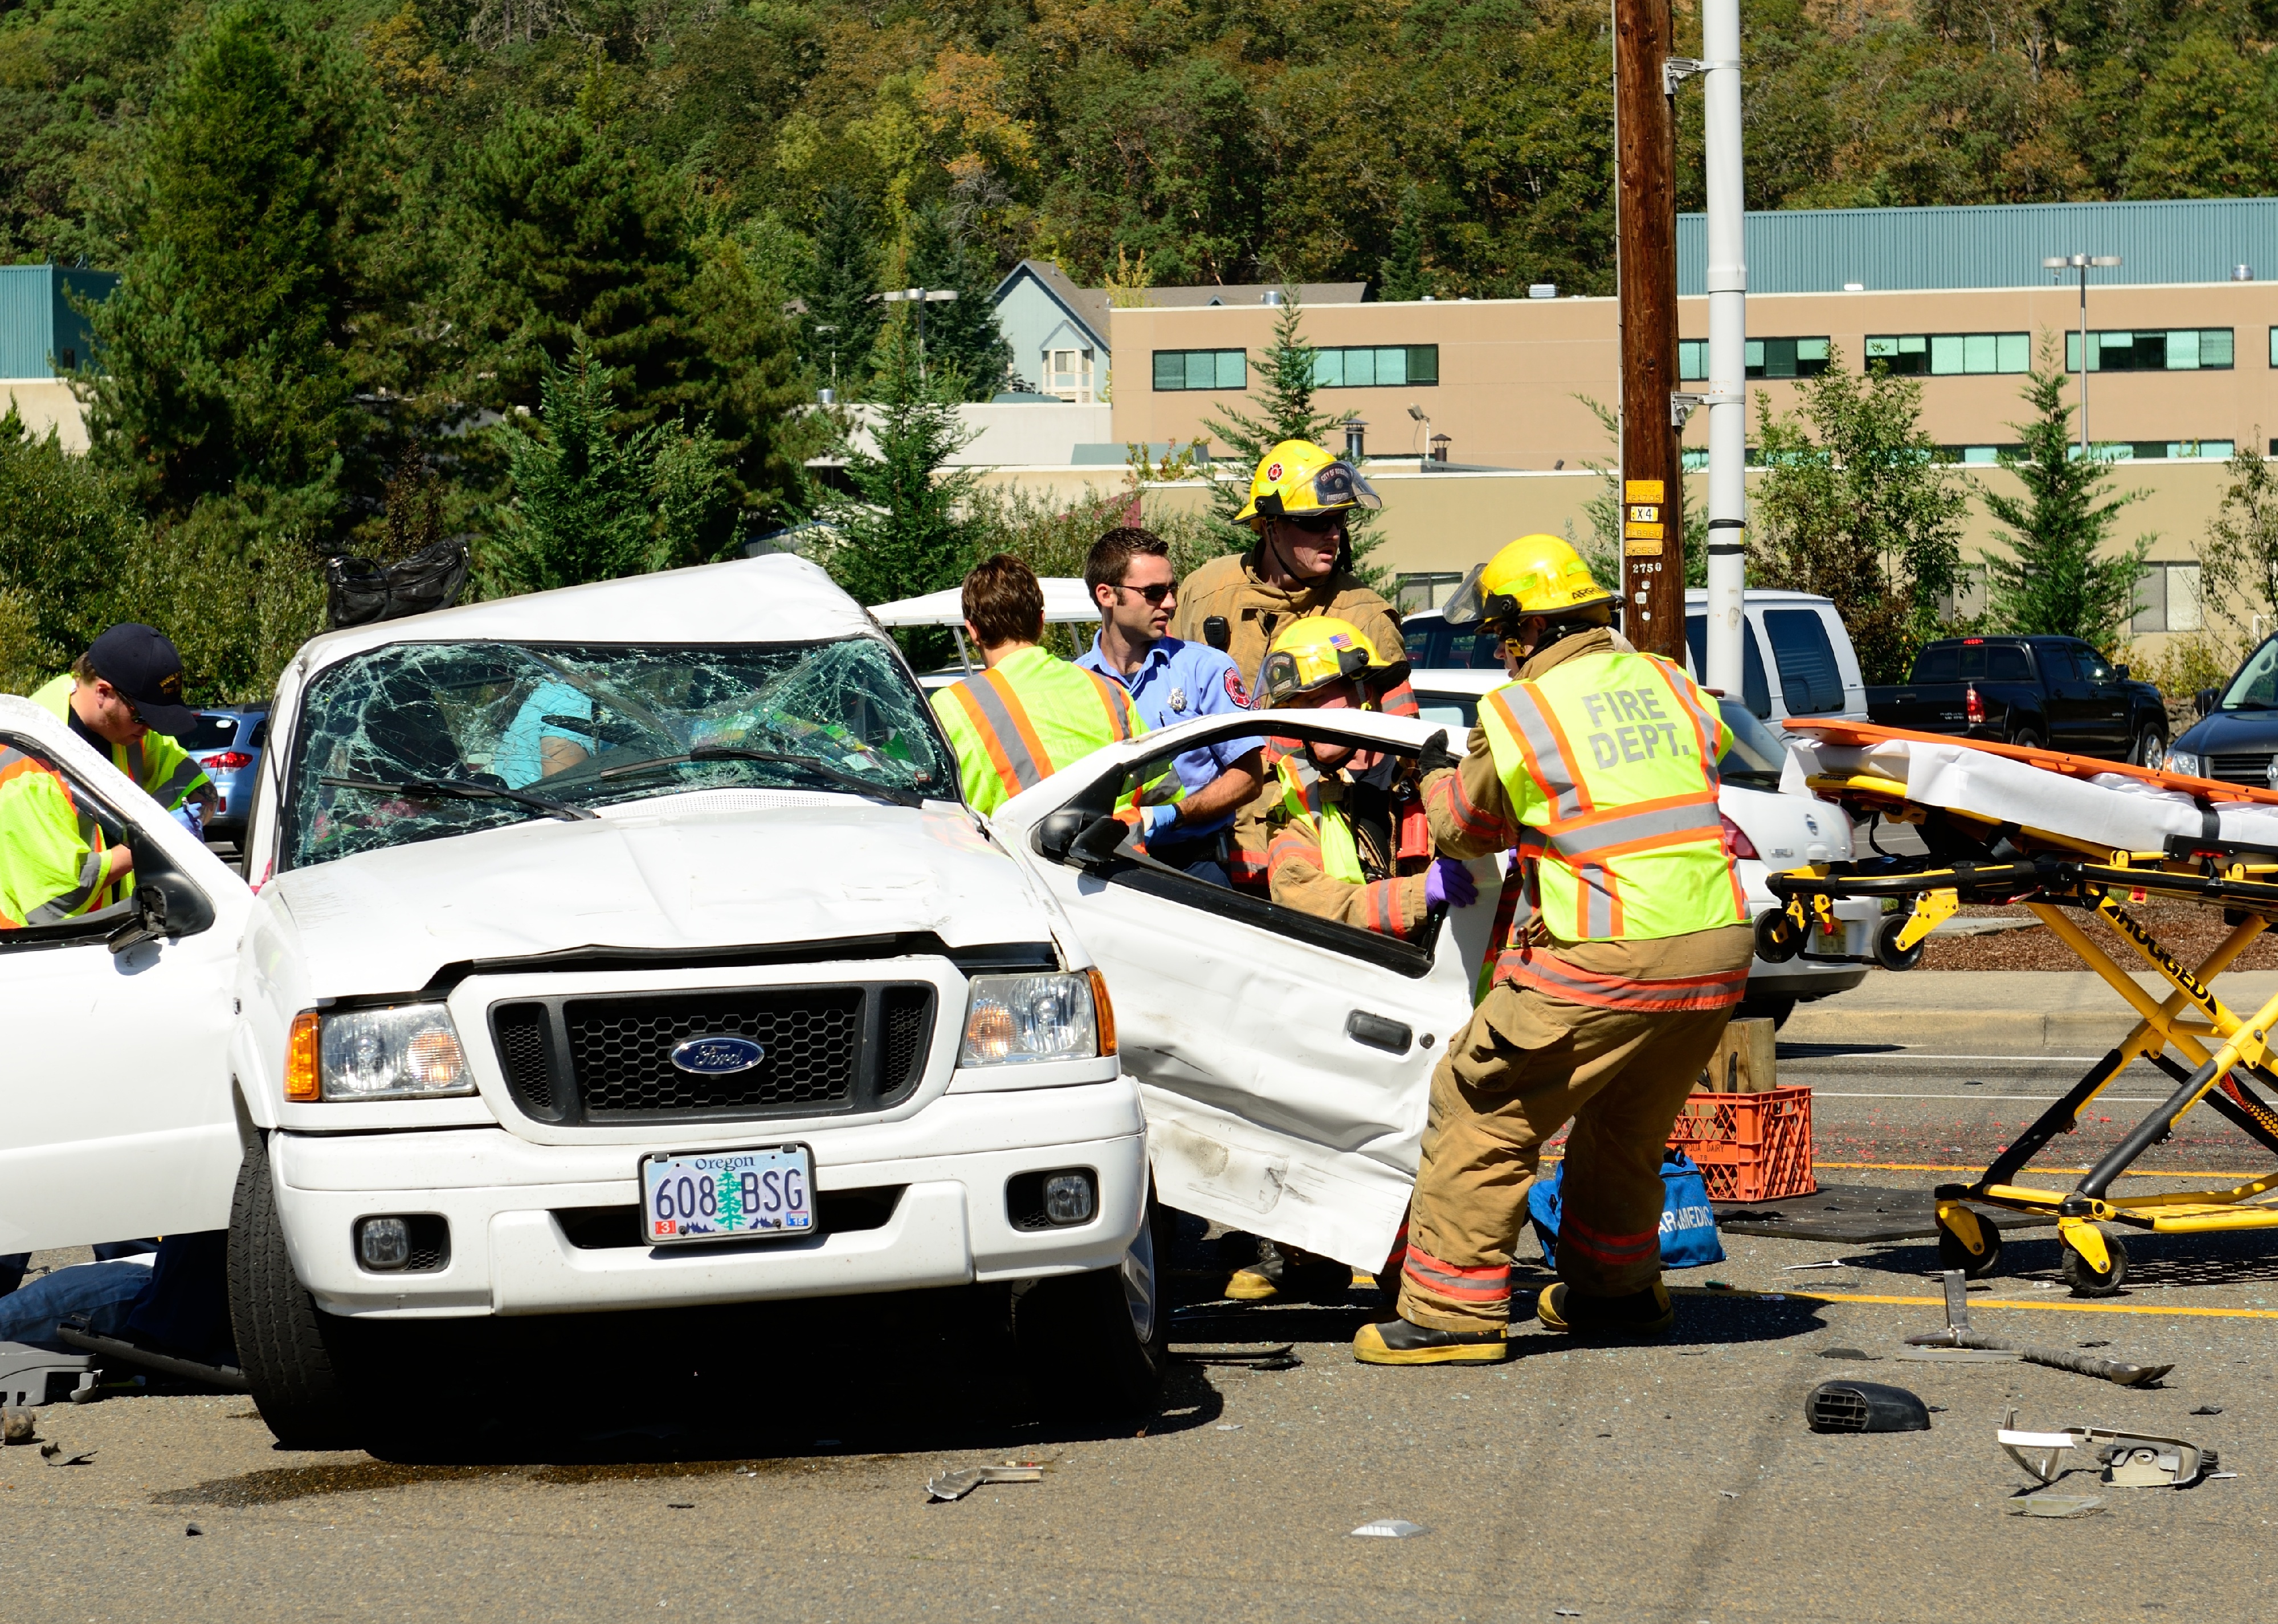 Firefighters extricate victims of a two vehicle t-bone accident.